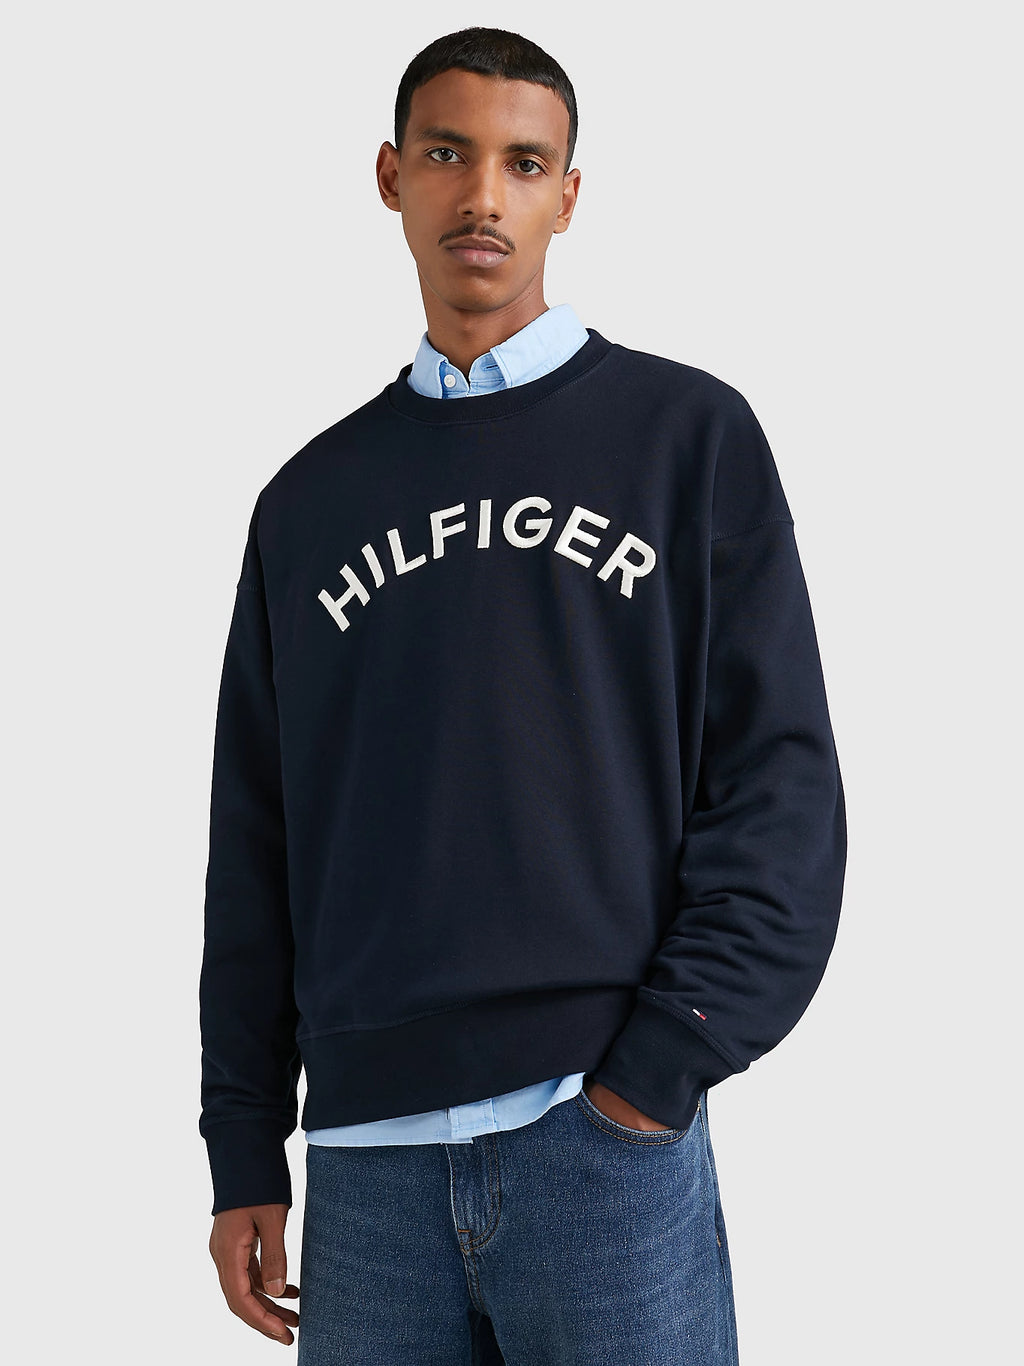 Sweat Tommy Hilfiger marine pour homme I Georgespaul